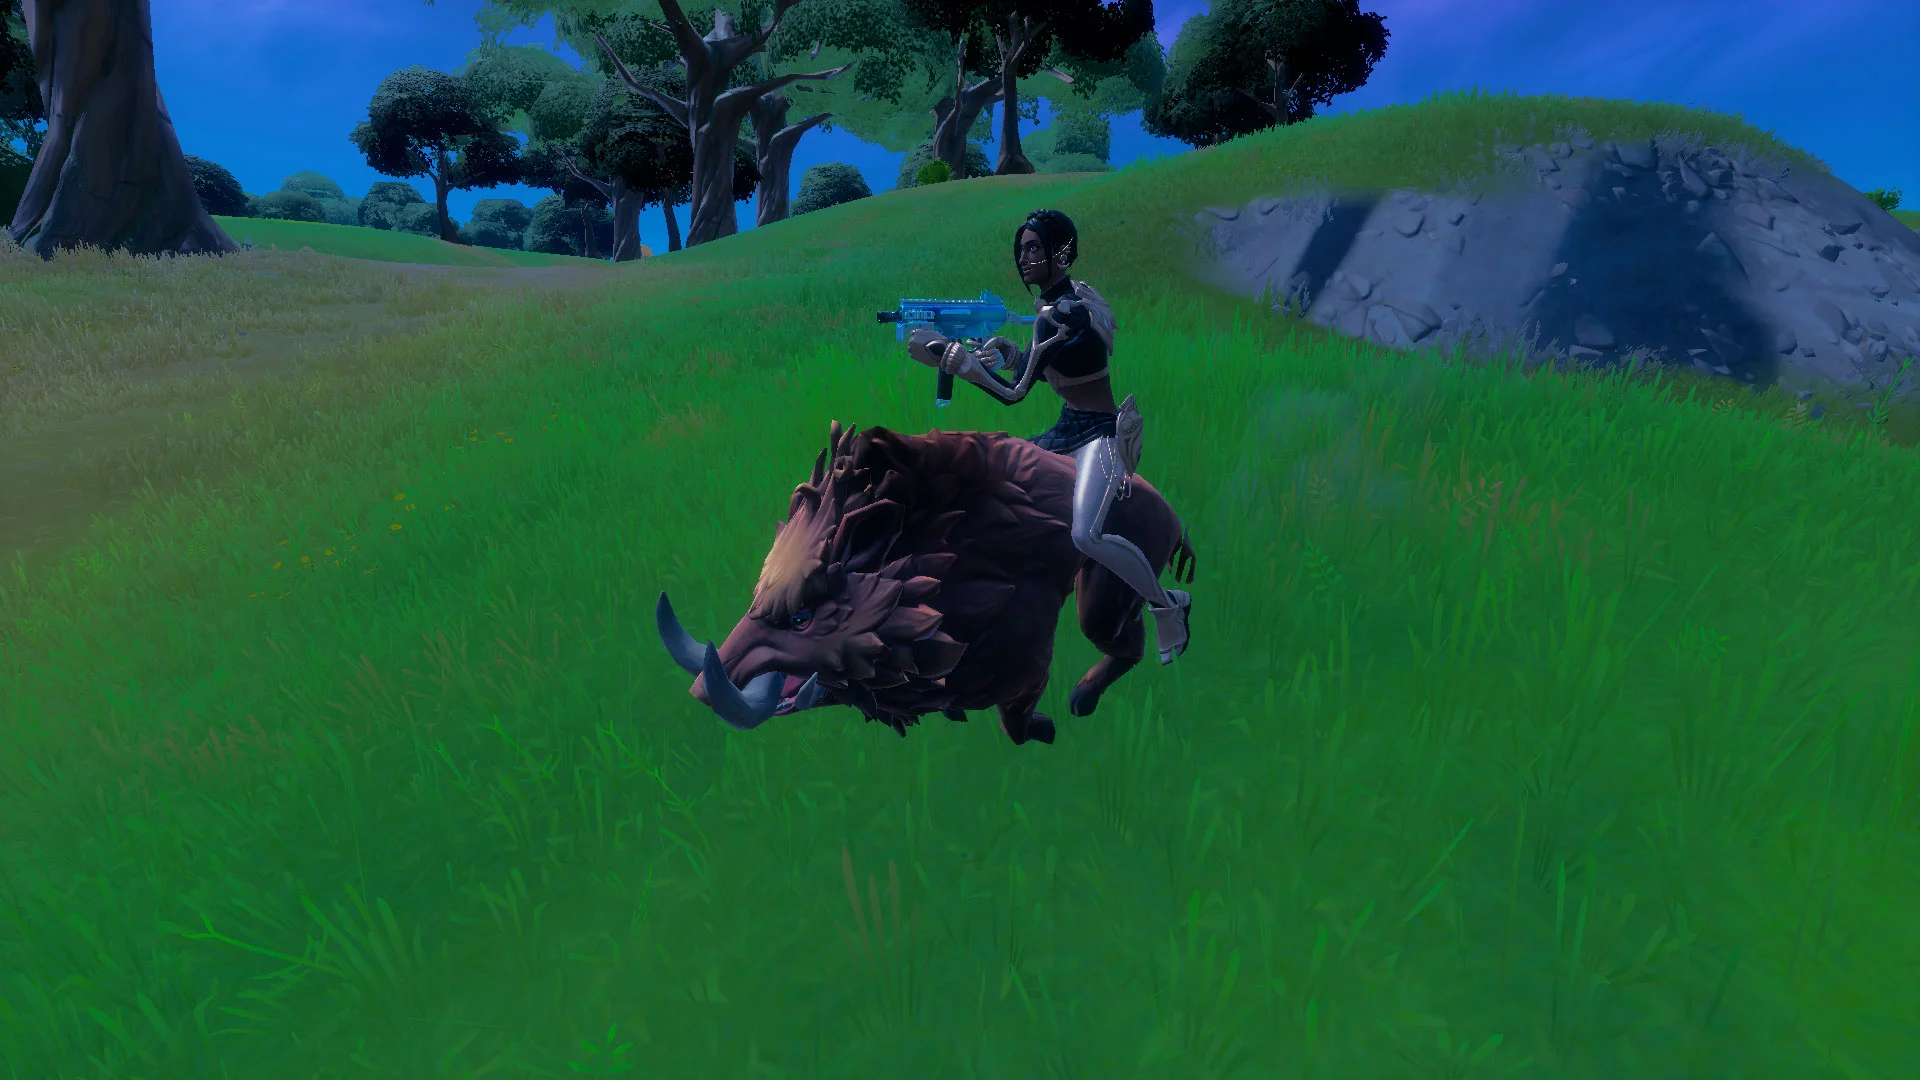 How to Headbutt an Opponent While Riding a Boar in Fortnite